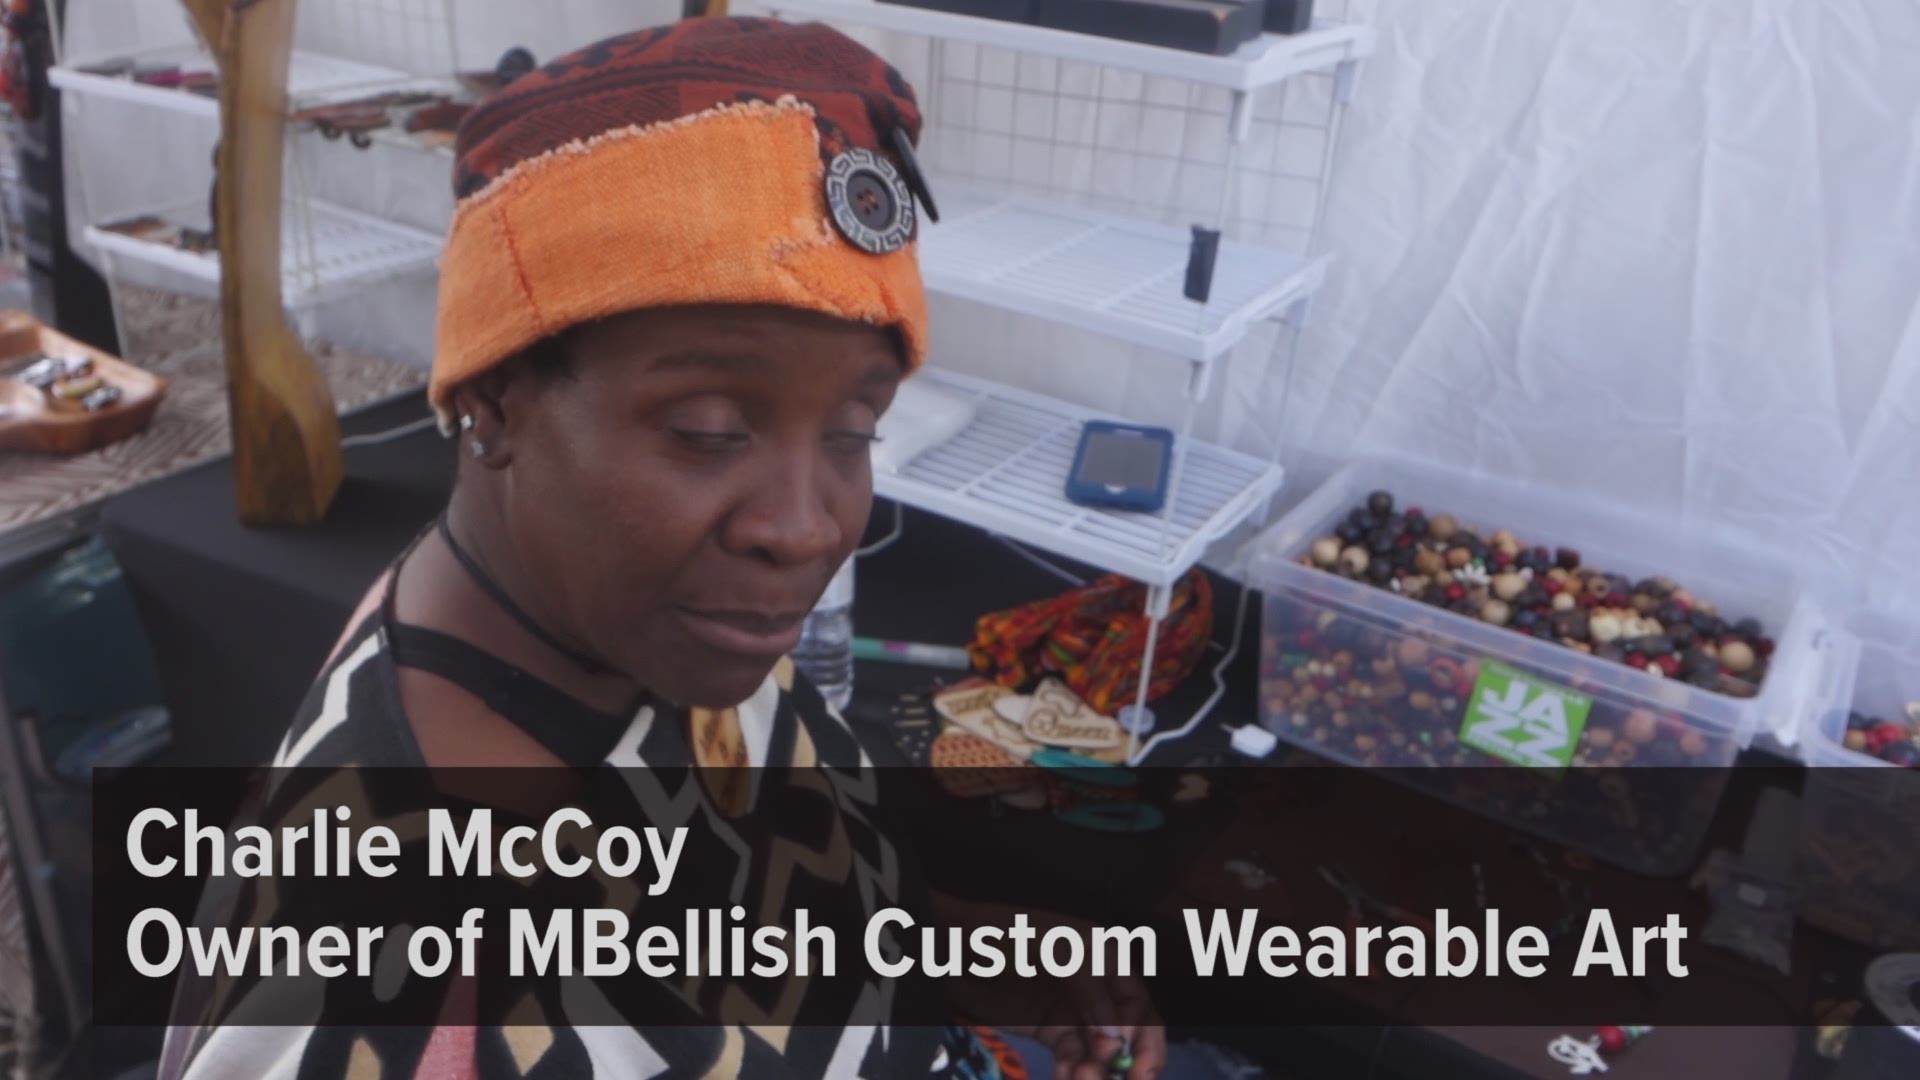 Charlie McCoy was born and raised in Northside Jacksonville and creates wearable art. She shared with First Coast YOU a special moment between her and her father, a fellow artist.